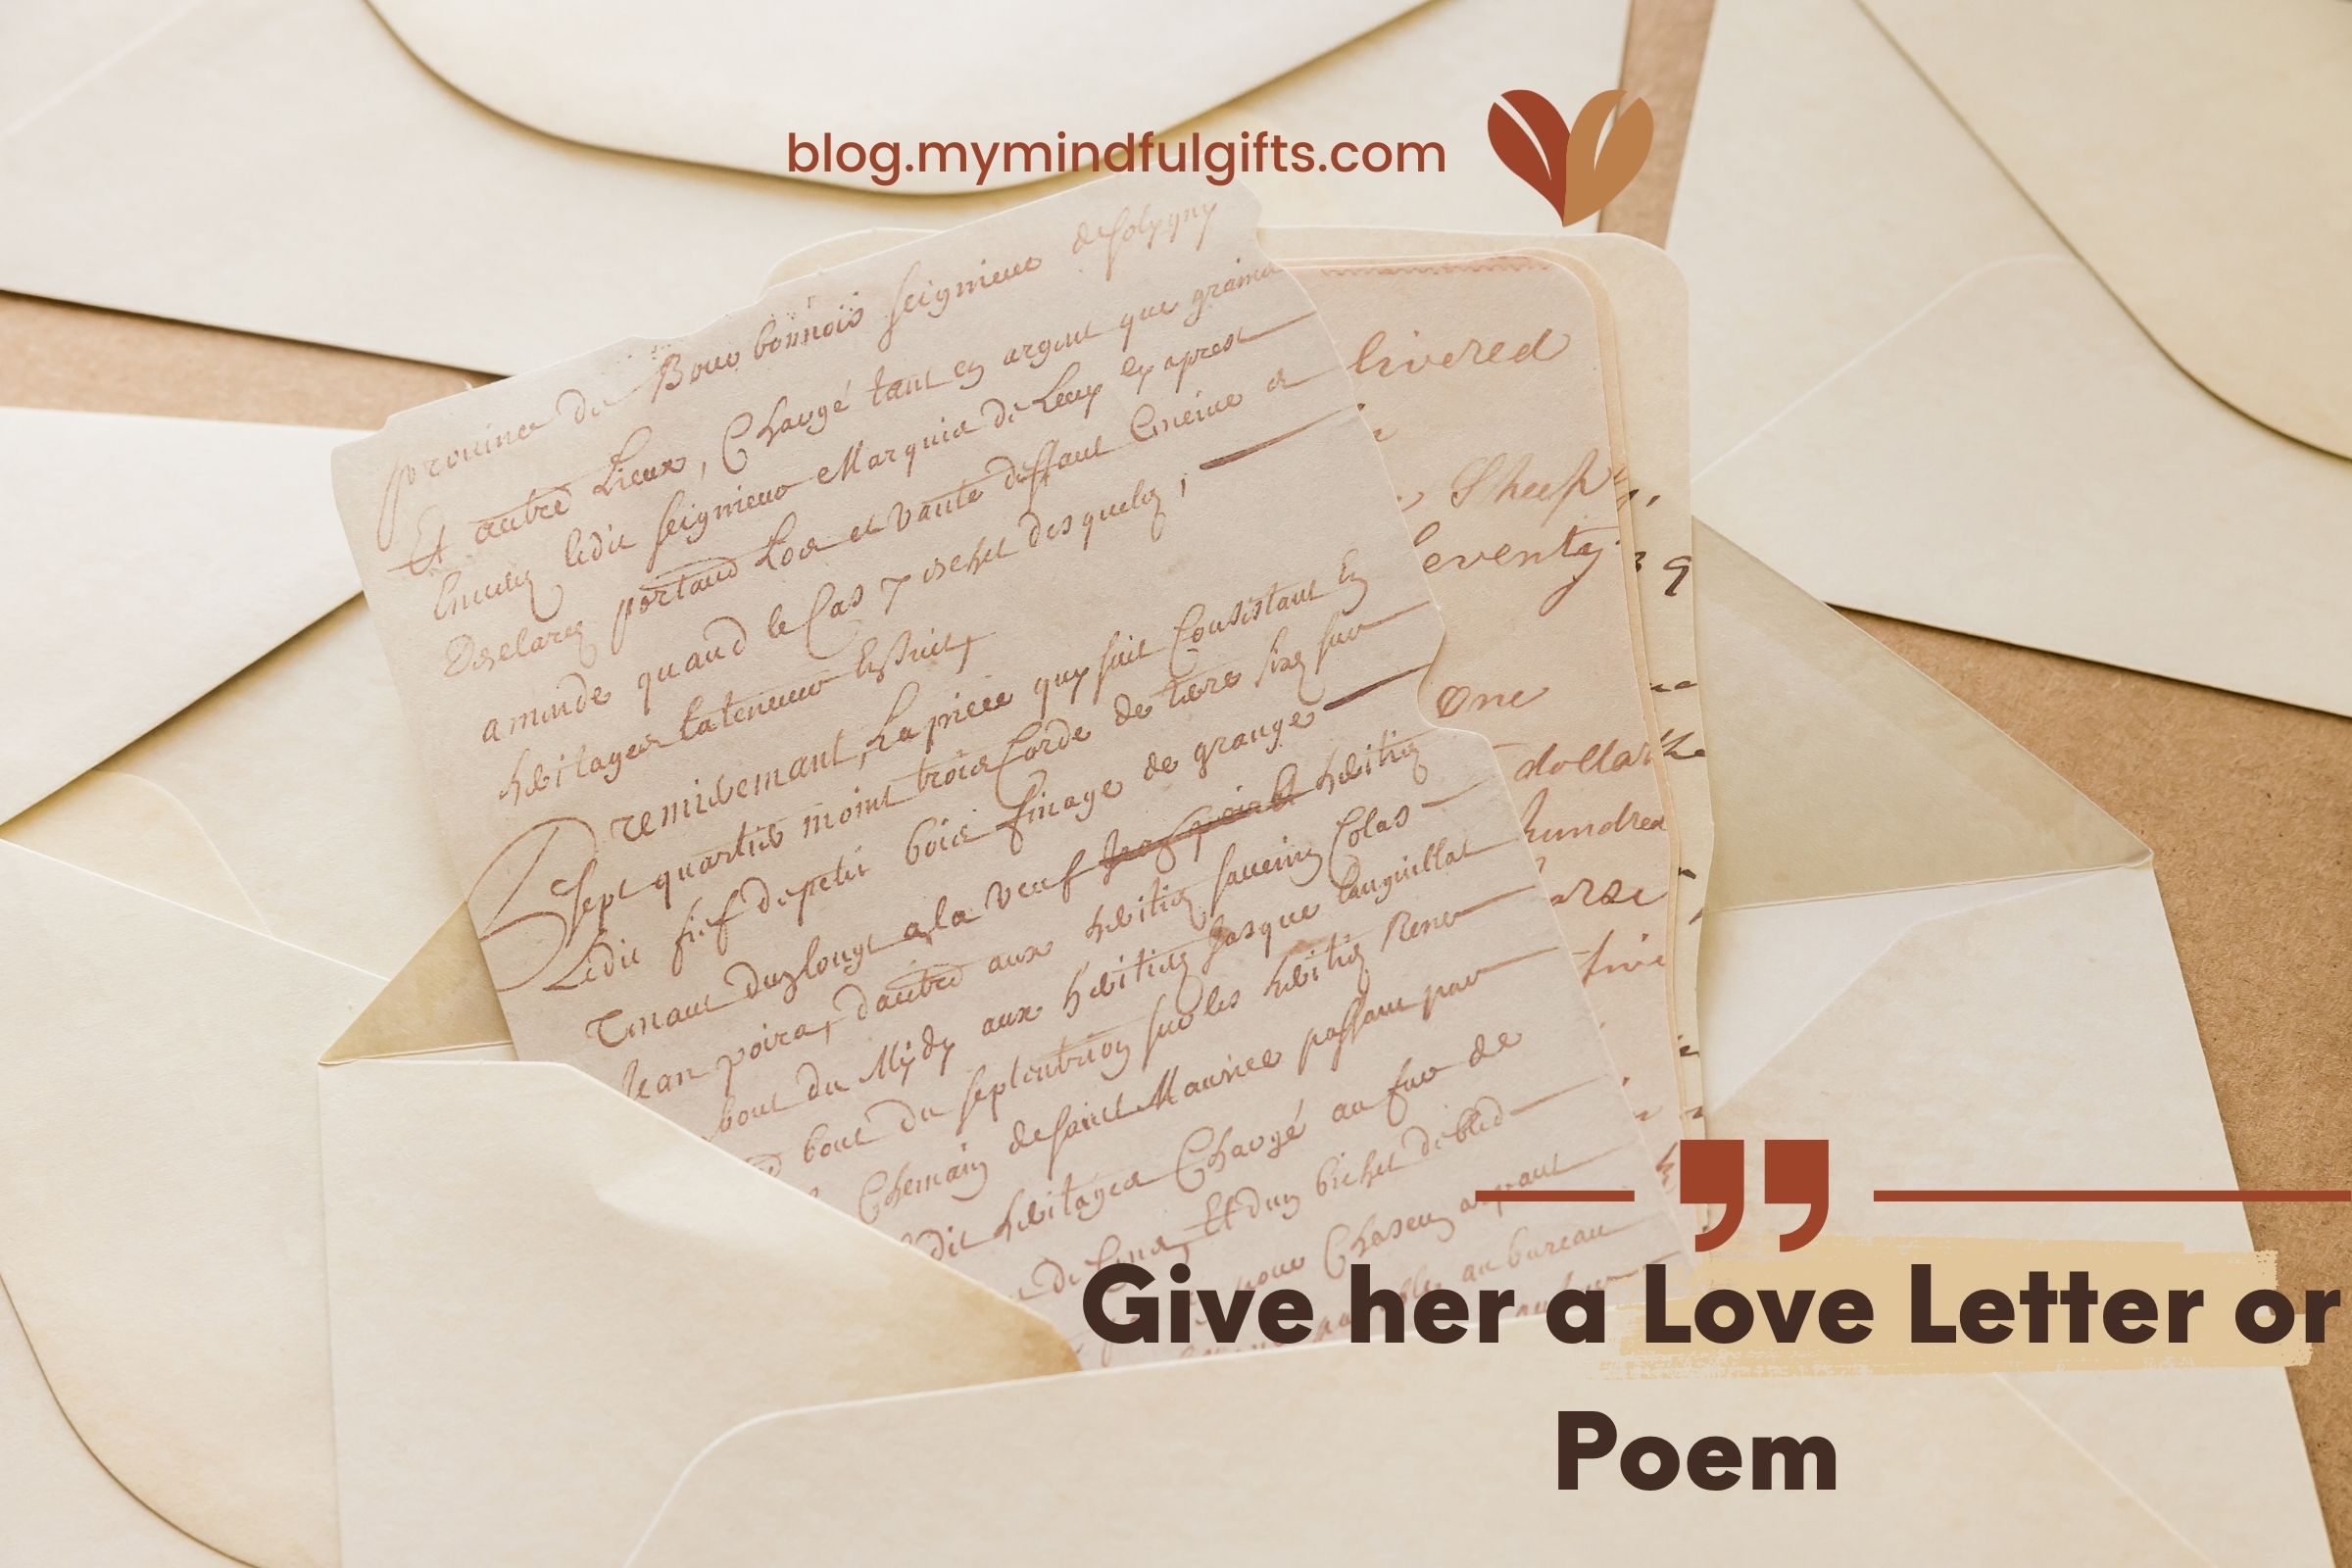 Give her a Love Letter or Poem